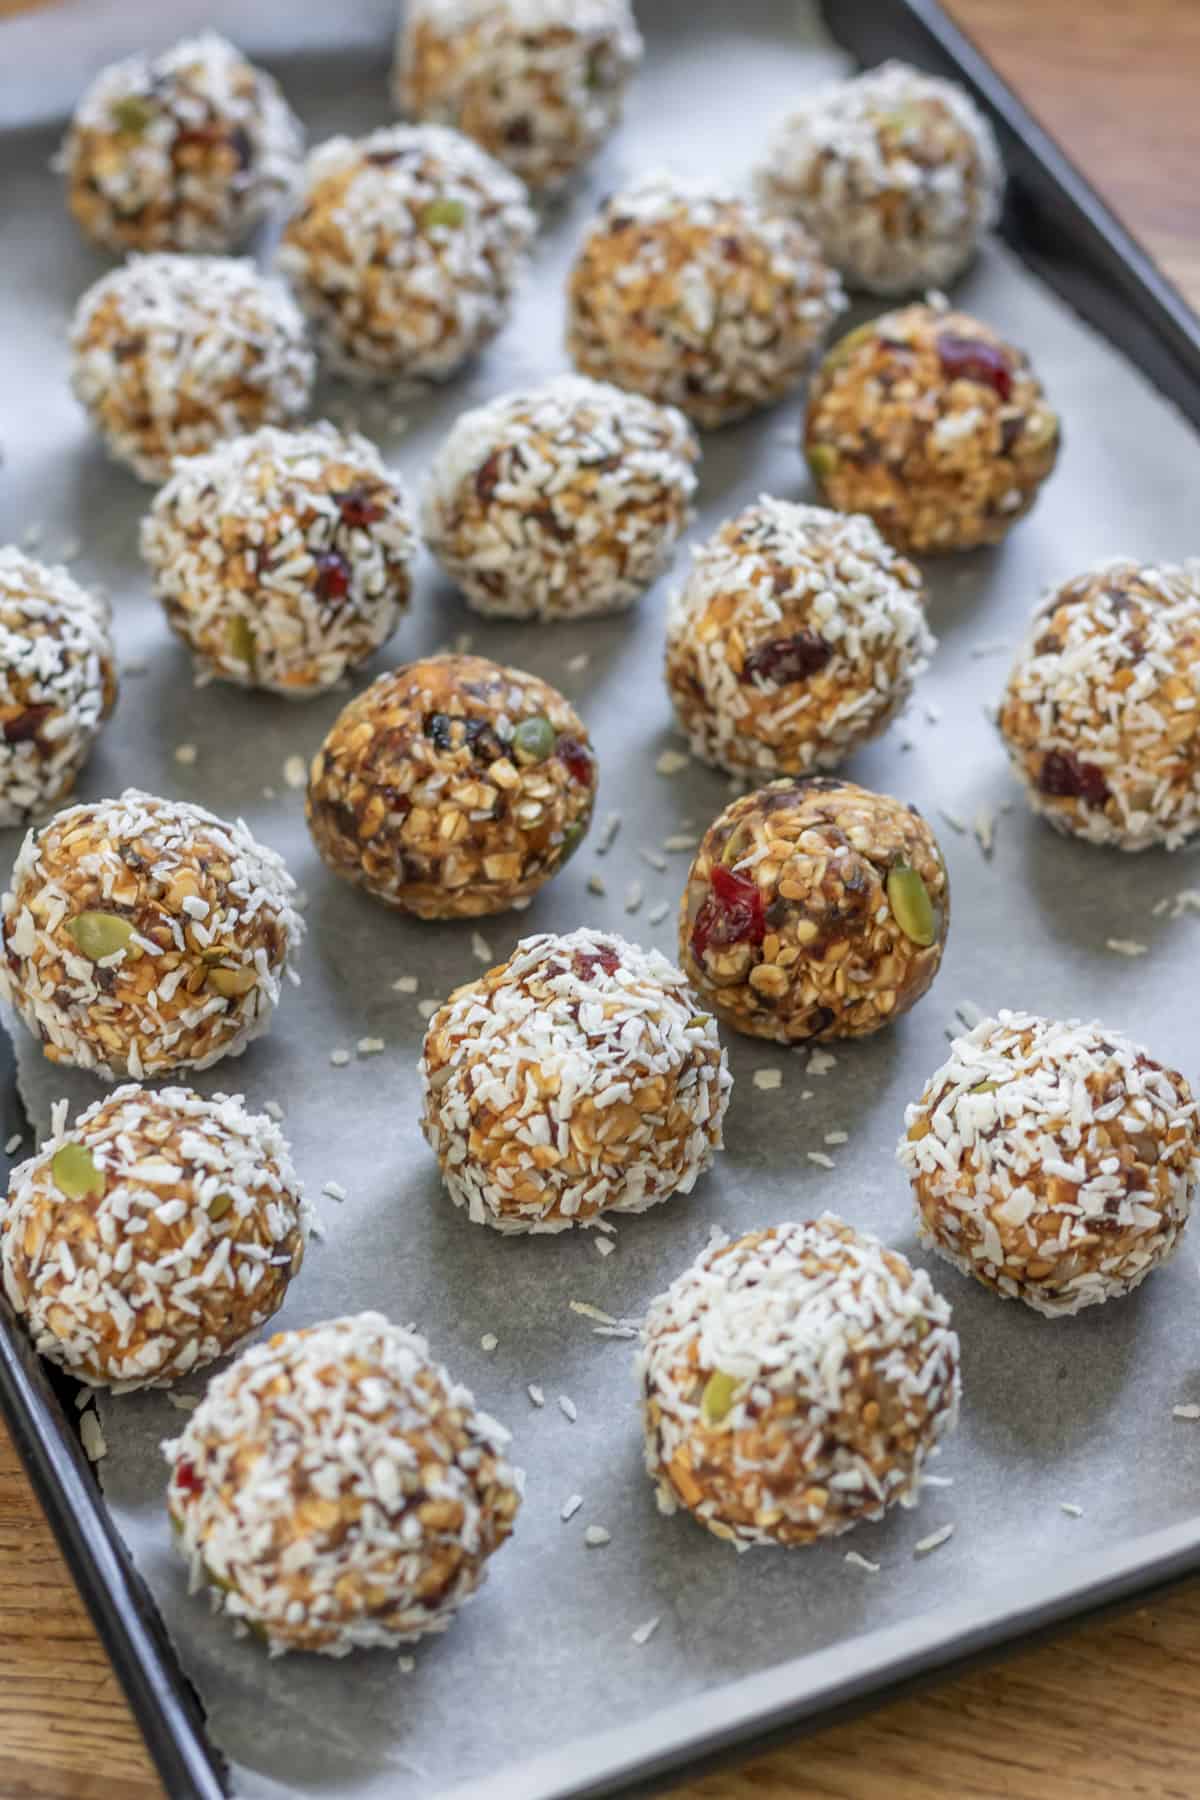 Rolled balls on a cookie sheet.